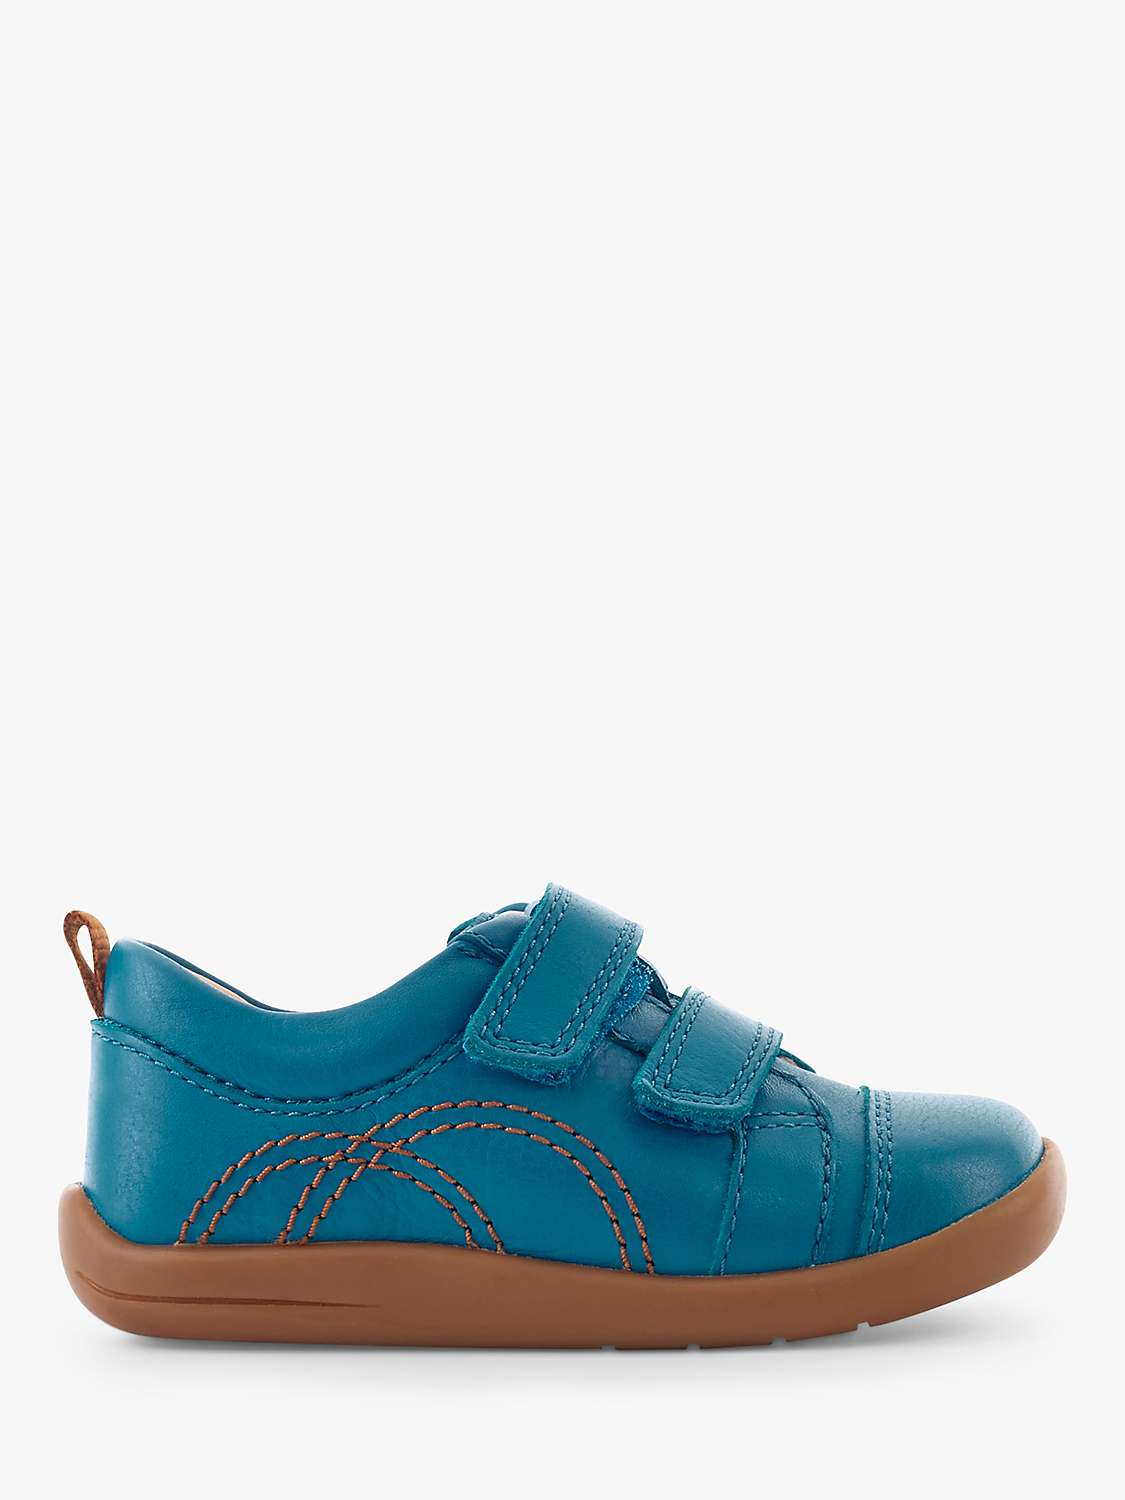 Buy Start-Rite Baby Treehouse Riptape Shoes, Bright Blue Online at johnlewis.com